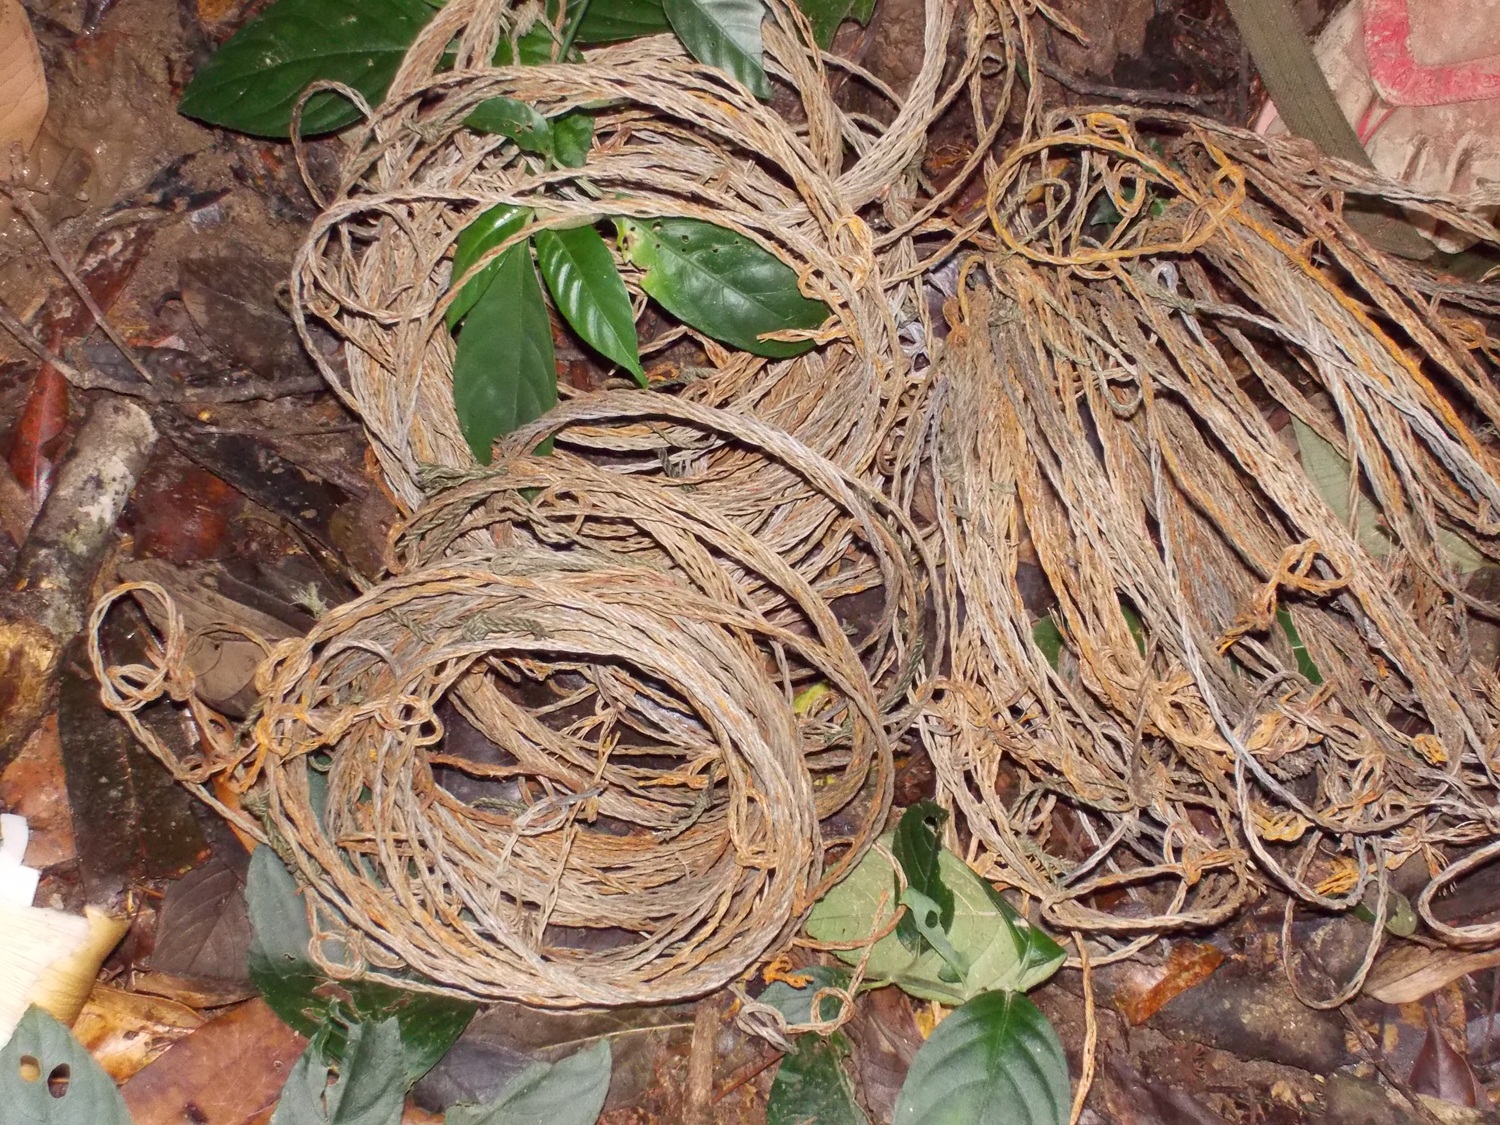 A collection of snares from a single foot patrol in Phou Sithone ESCA